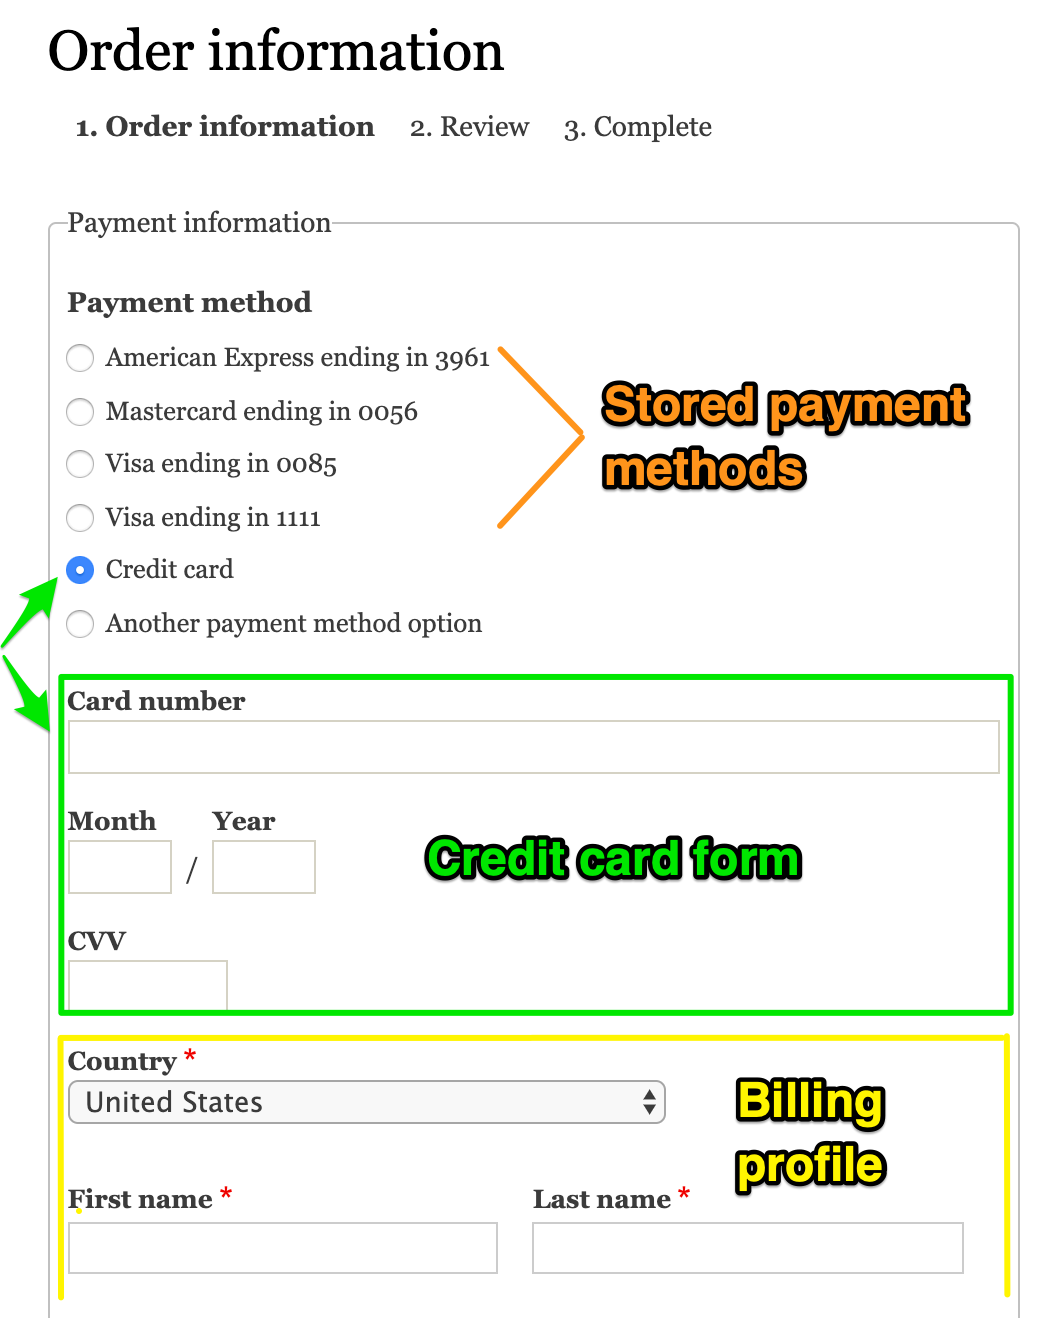 Payment information checkout pane